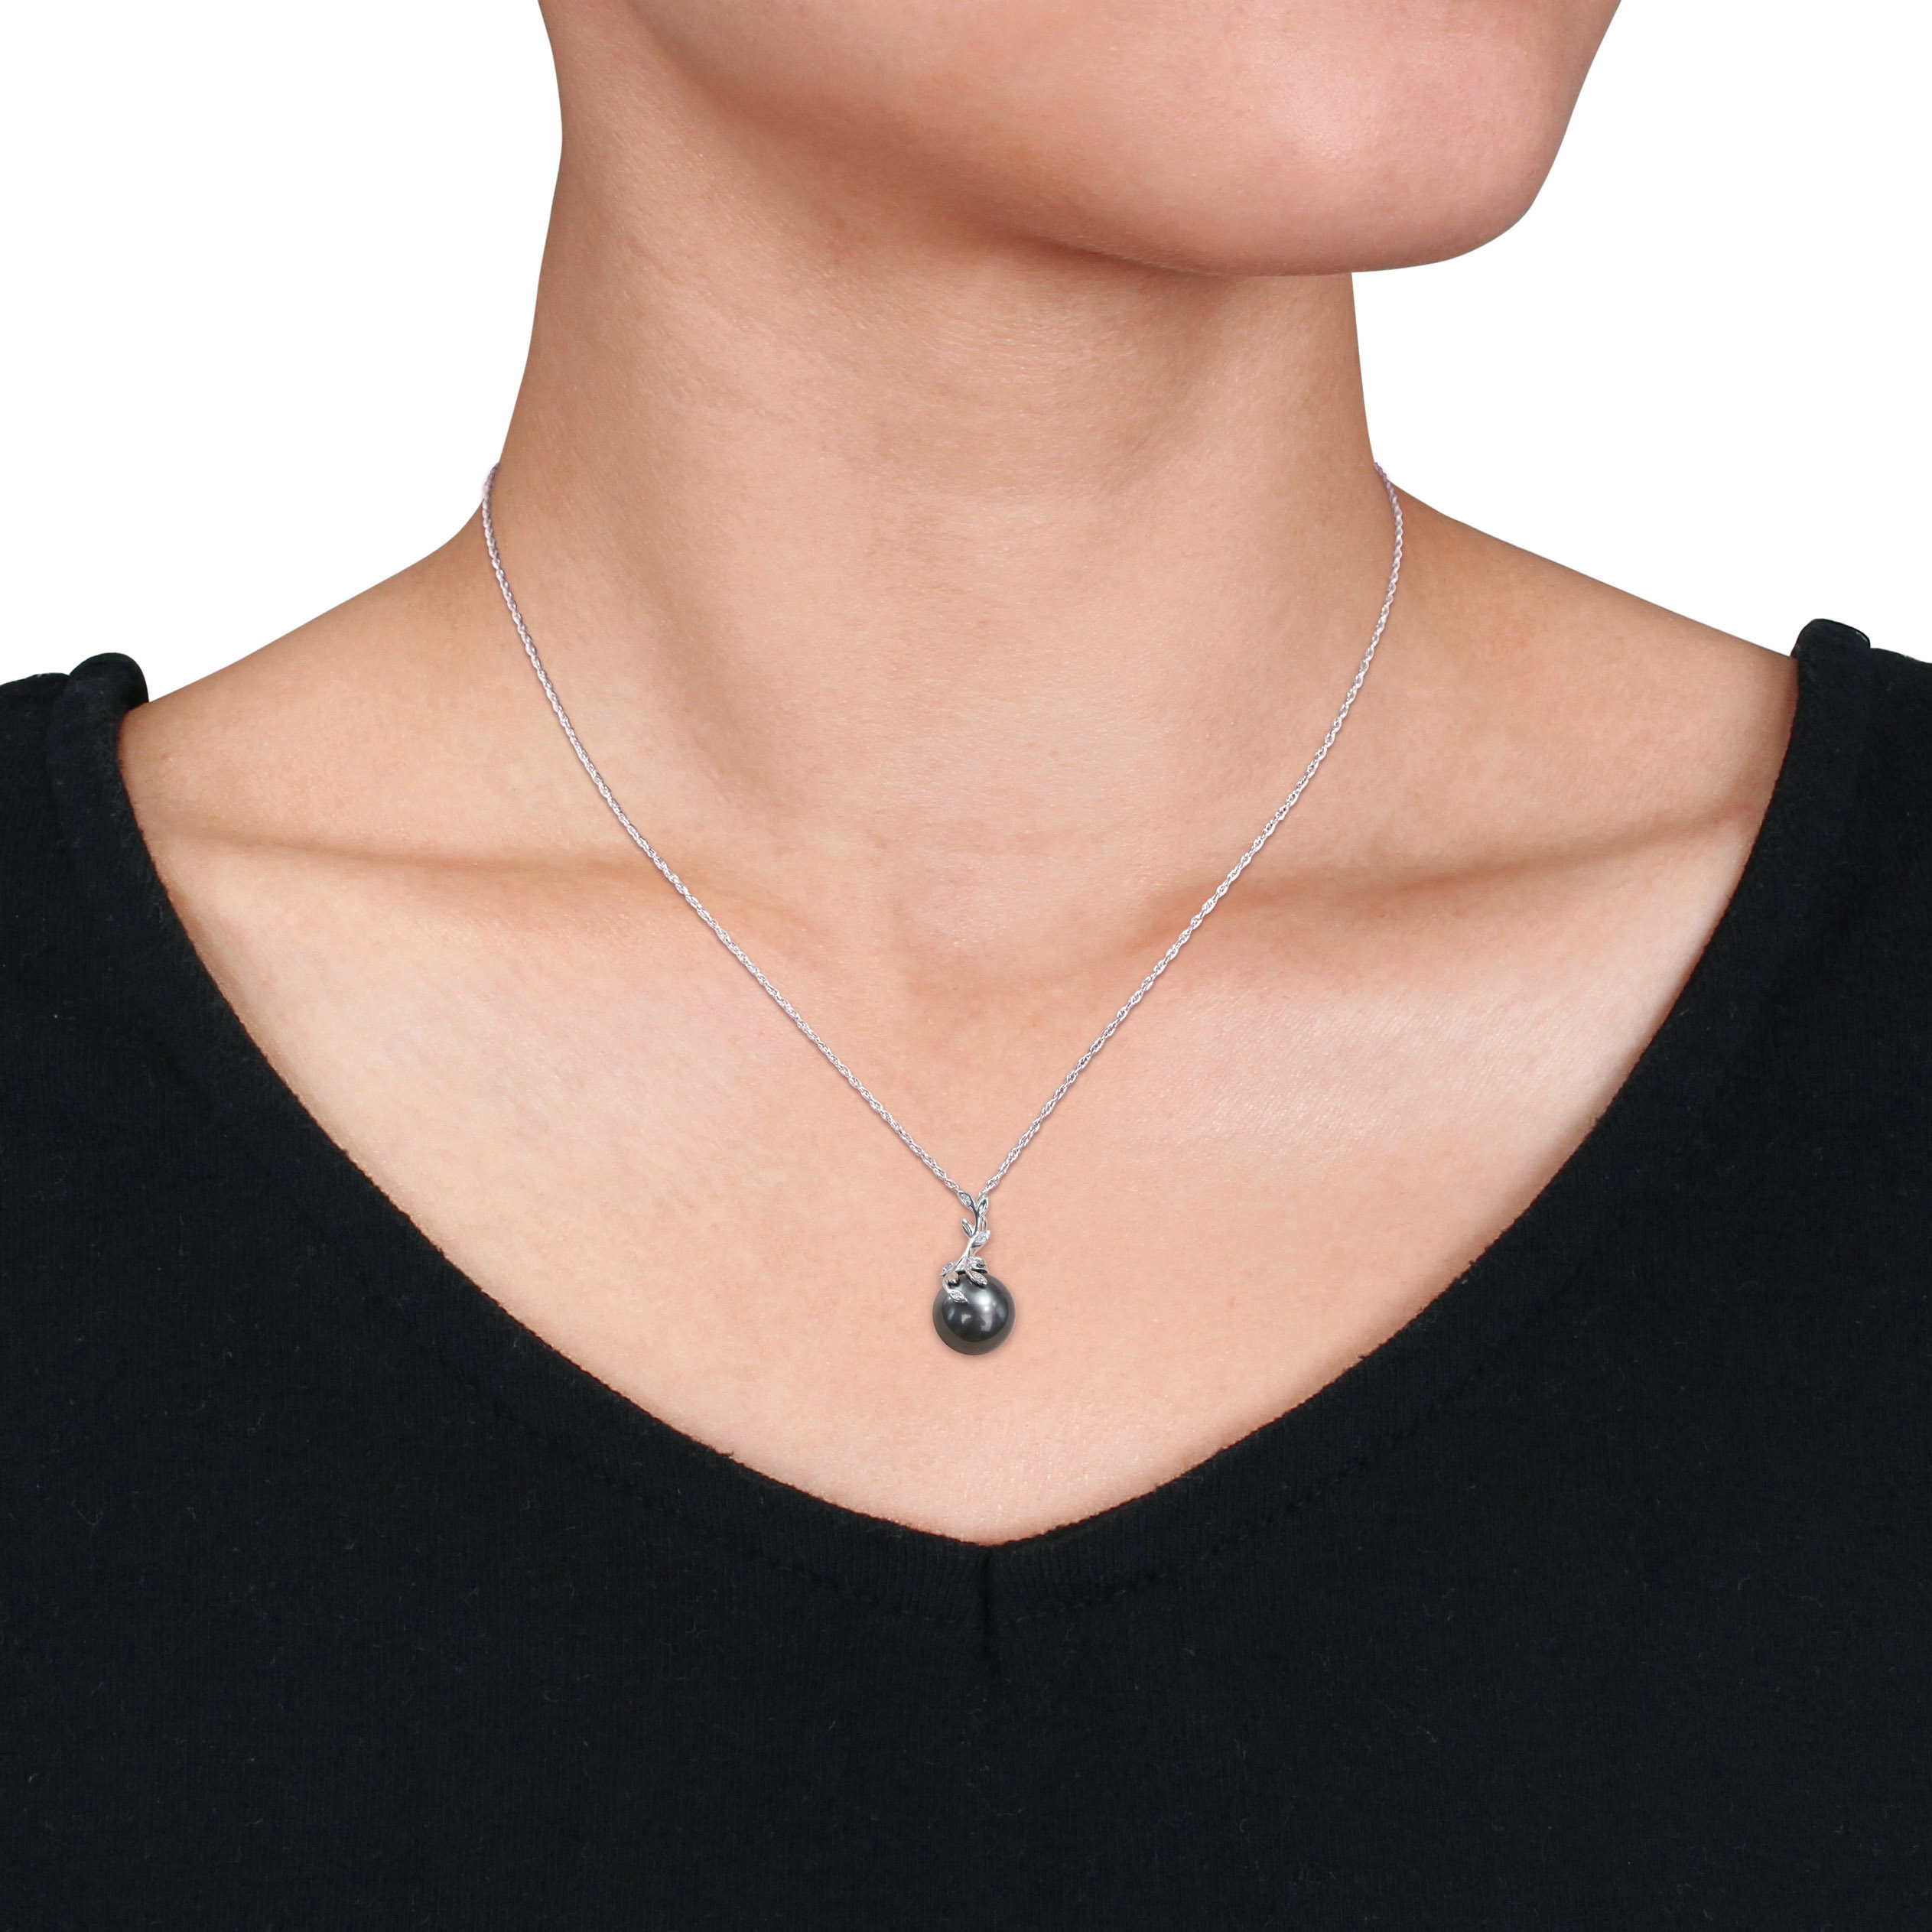 12-12.5 MM Black Tahitian Cultured Pearl and Diamond Accent Leaf Design Pendant with Chain in 14k White Gold - 17 in.